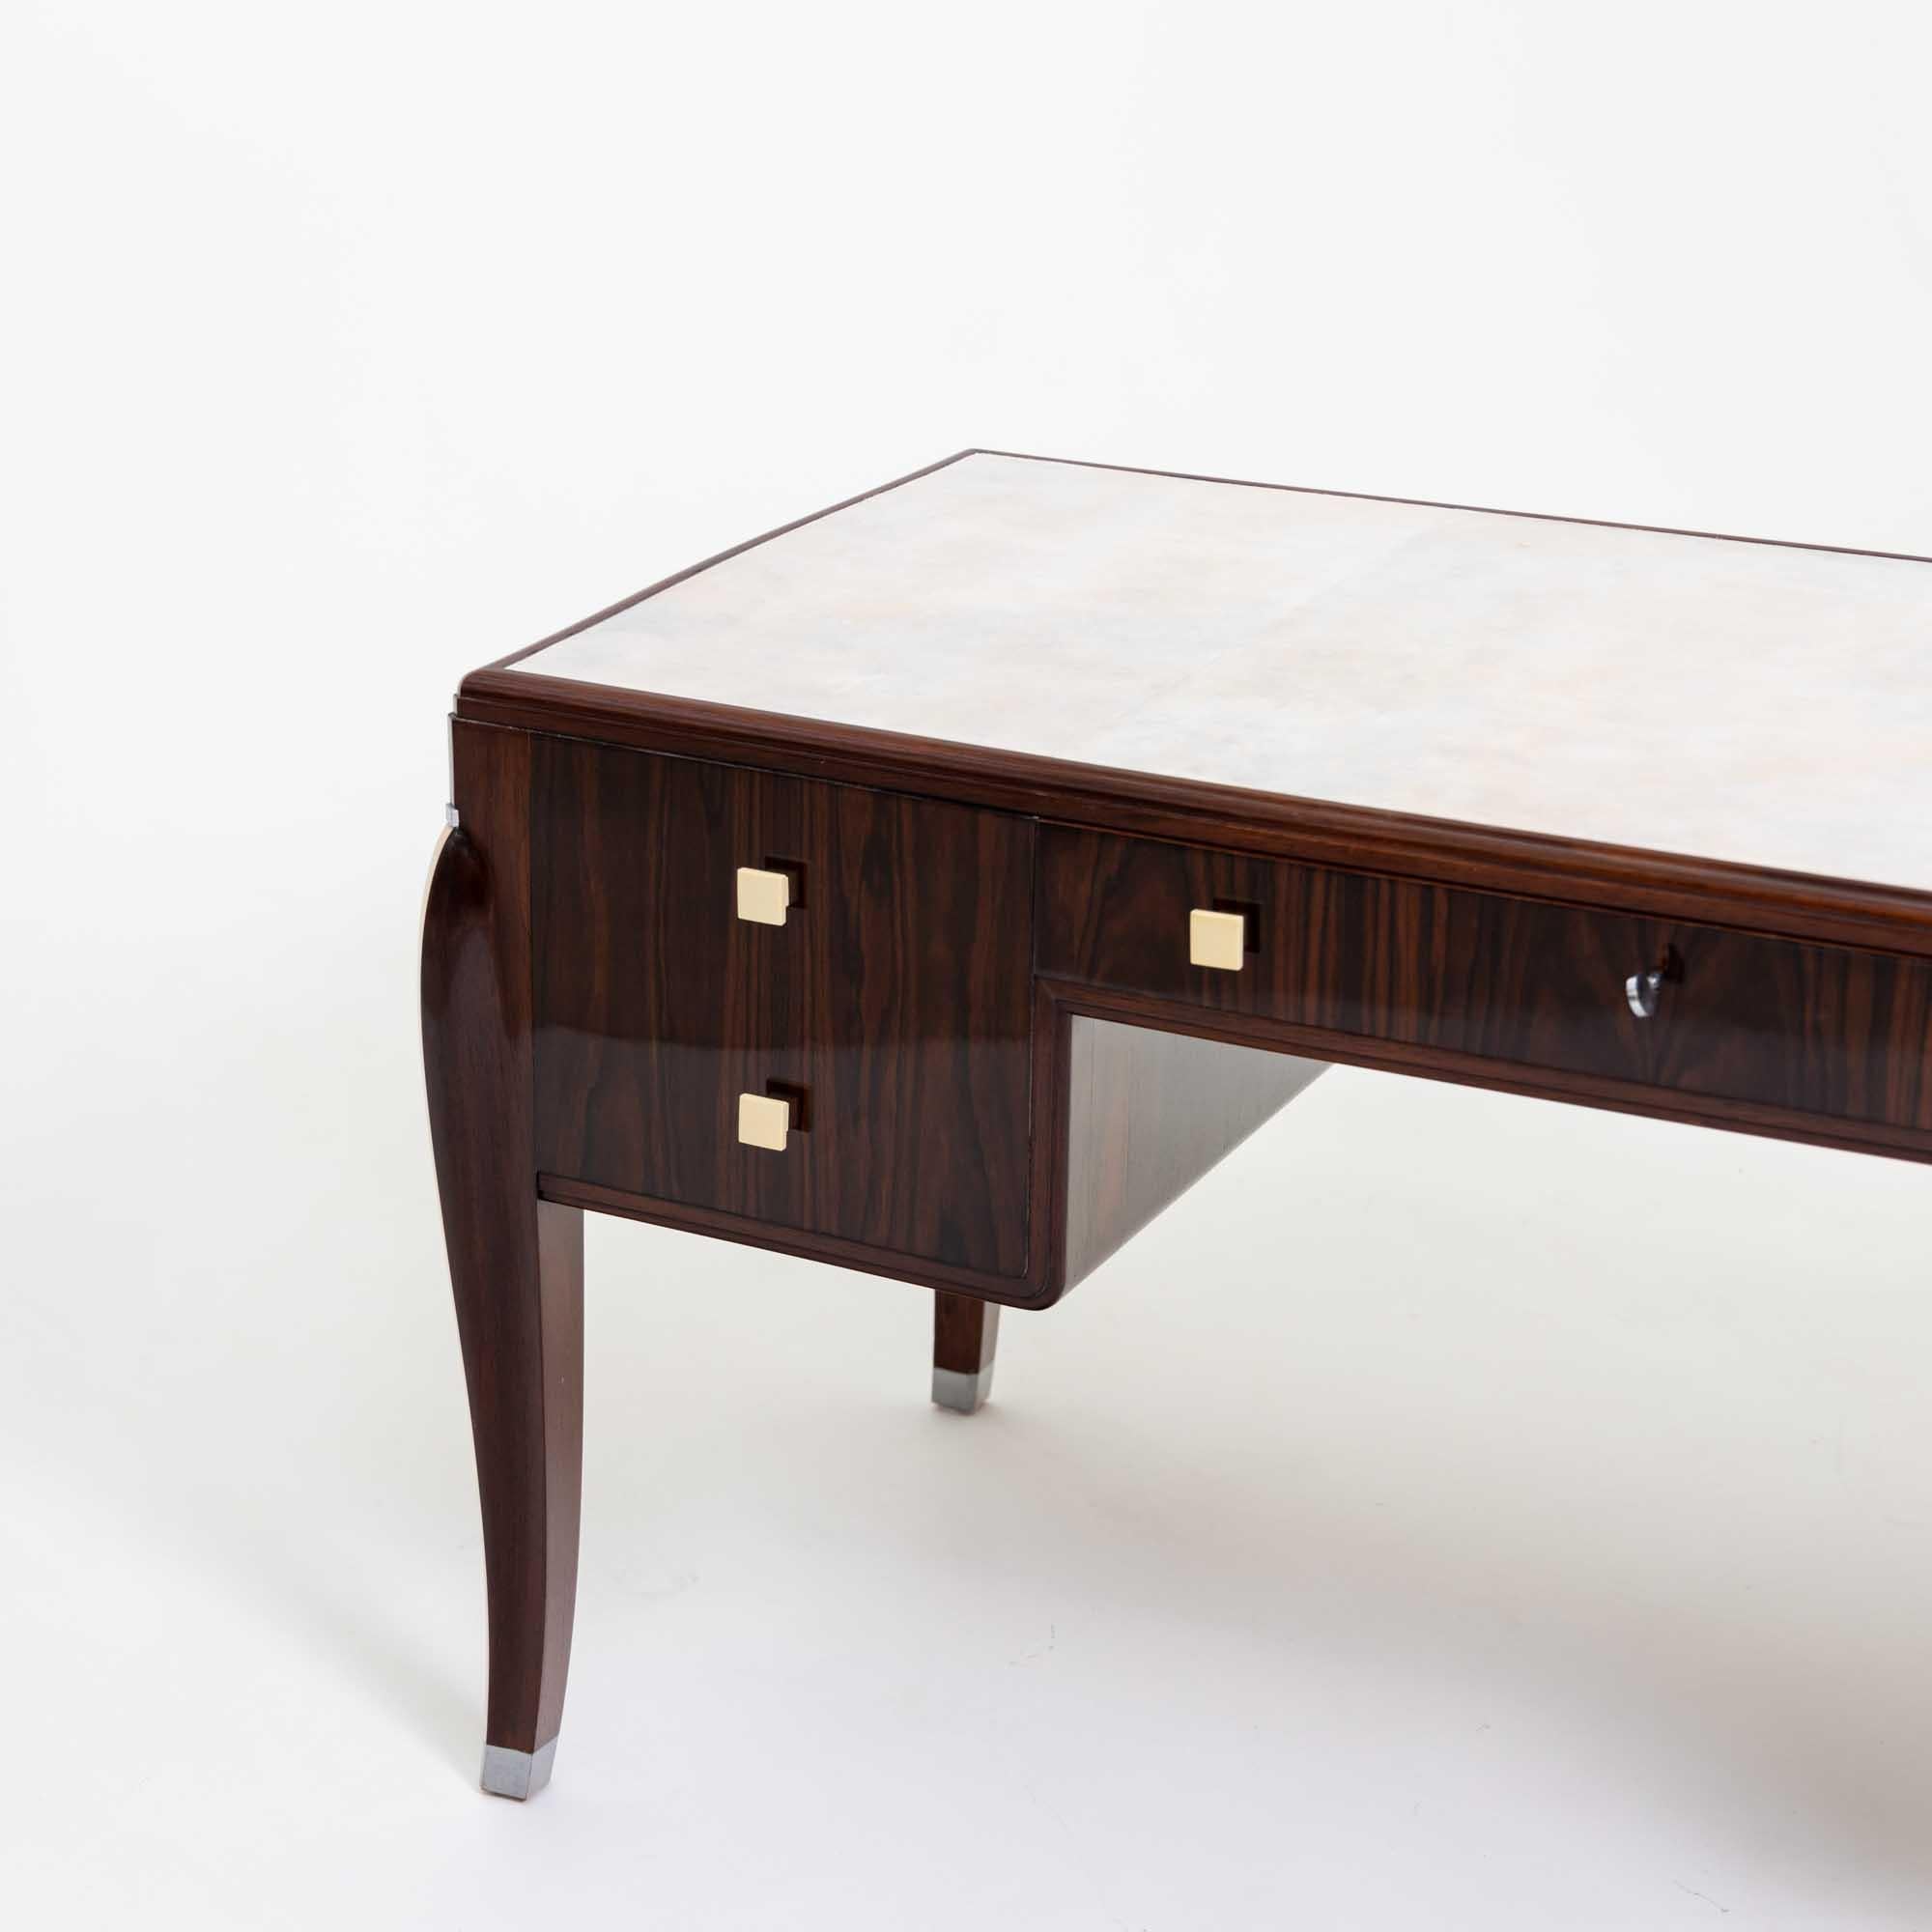 A fine Art Deco desk with a parchment writing surface. 
Details of nickel with cream colored pulls. Features three opening drawers ( center and two side drawers )
and two faux drawers on opposite side. Back of the desk has two drawers that open. 

